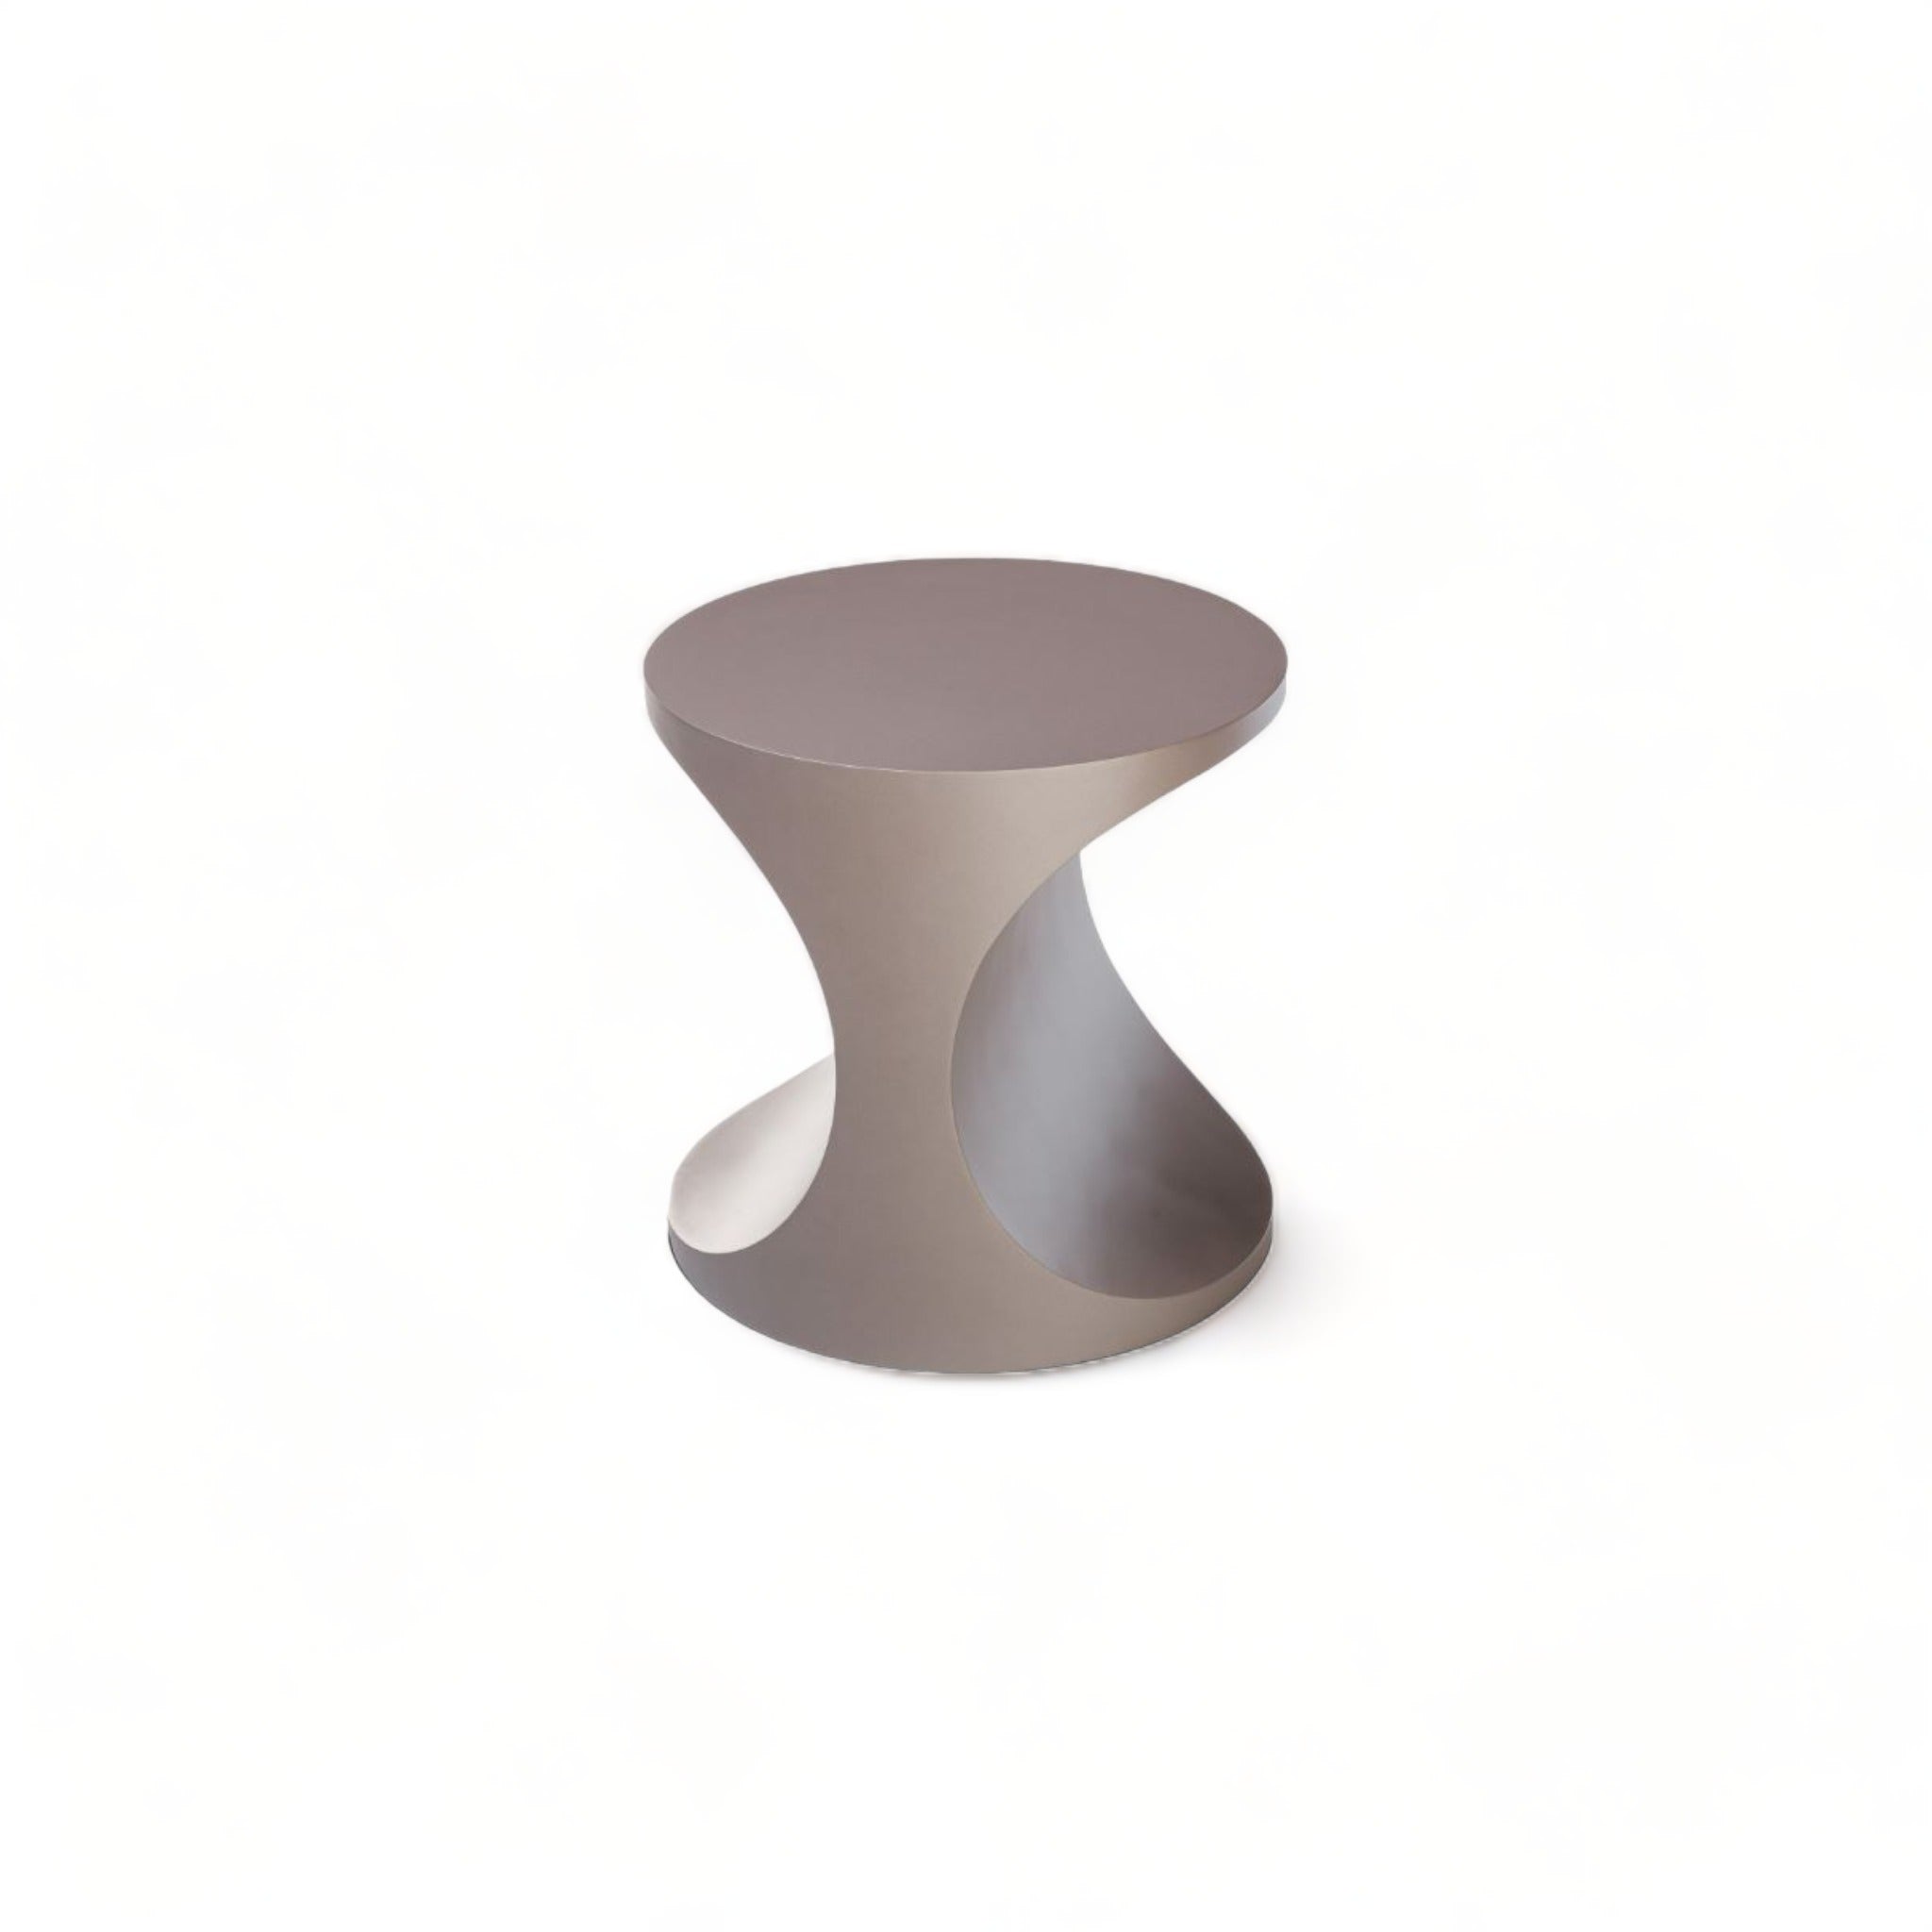 Apple Urano Round Side Table